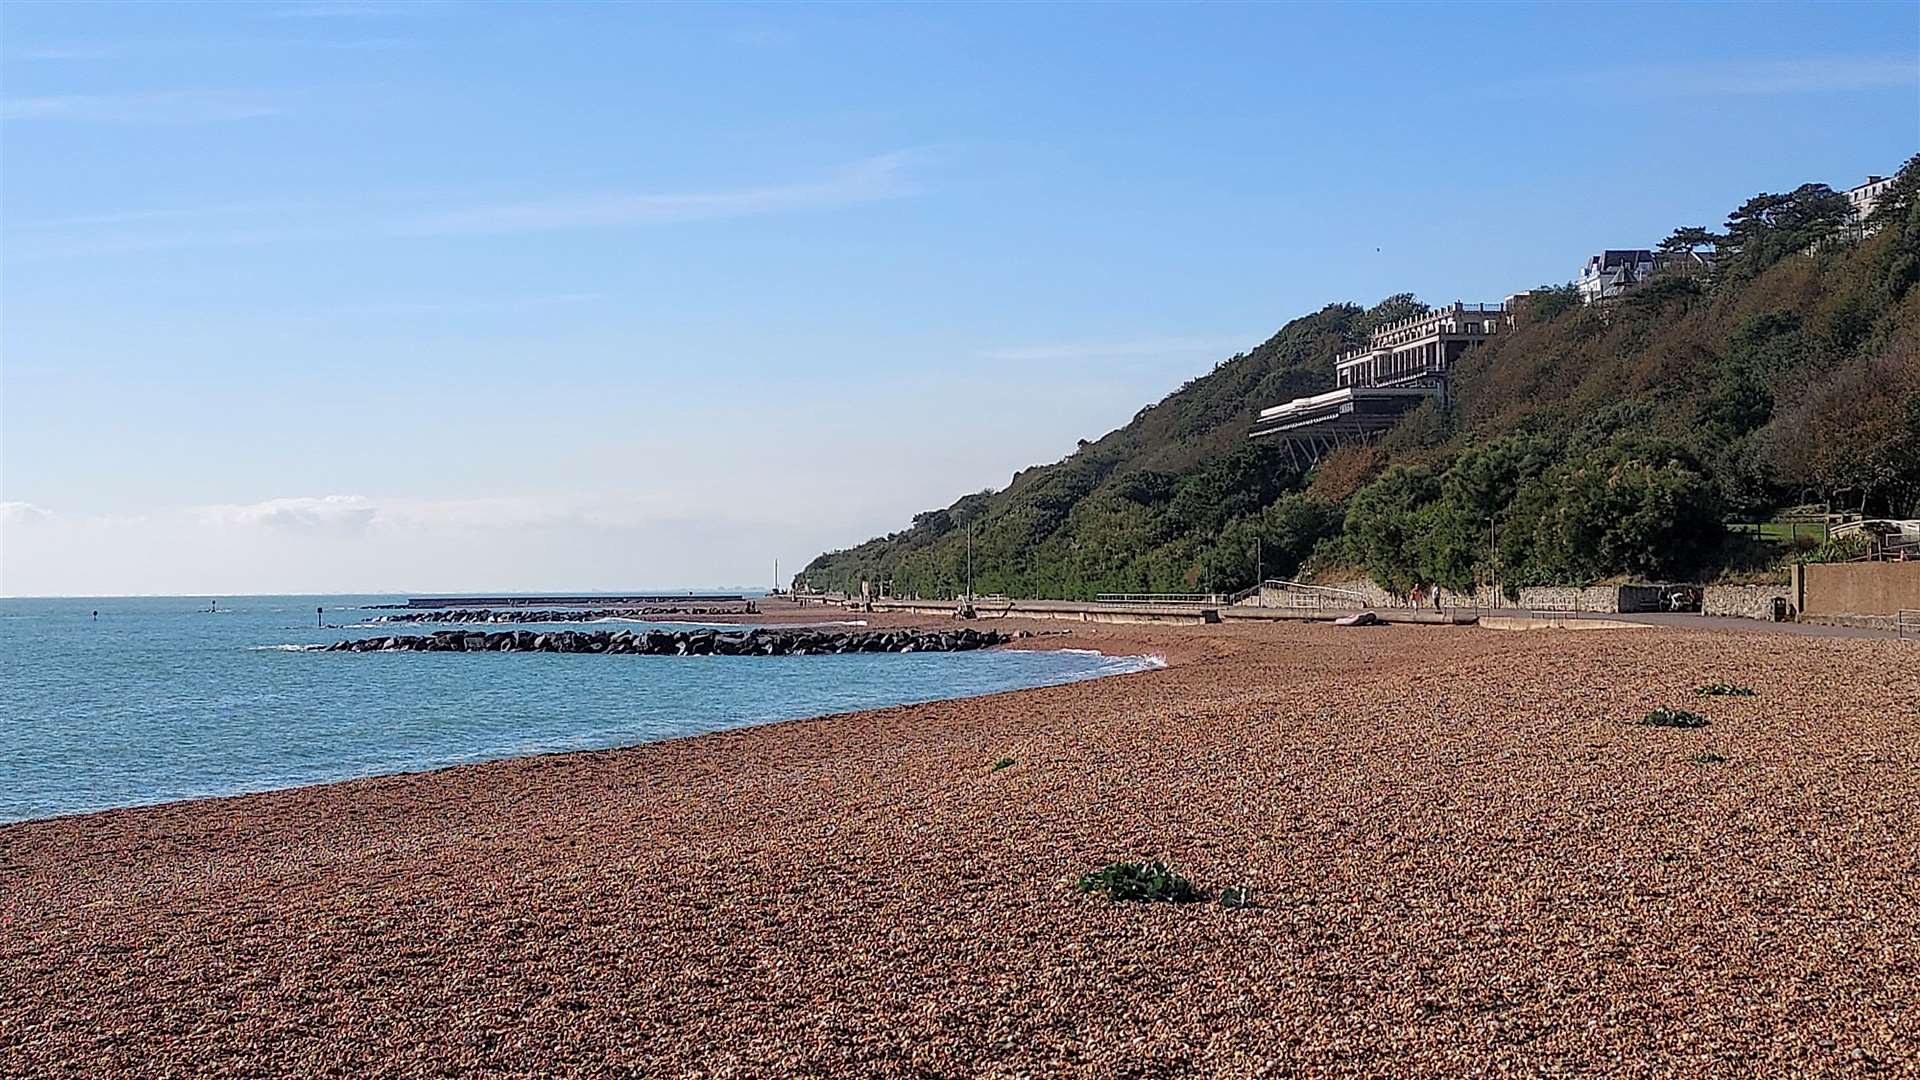 Folkestone beach and the Lower Leas Coastal Park are great places to visit with the family during the summer holidays. Picture: Rhys Griffiths